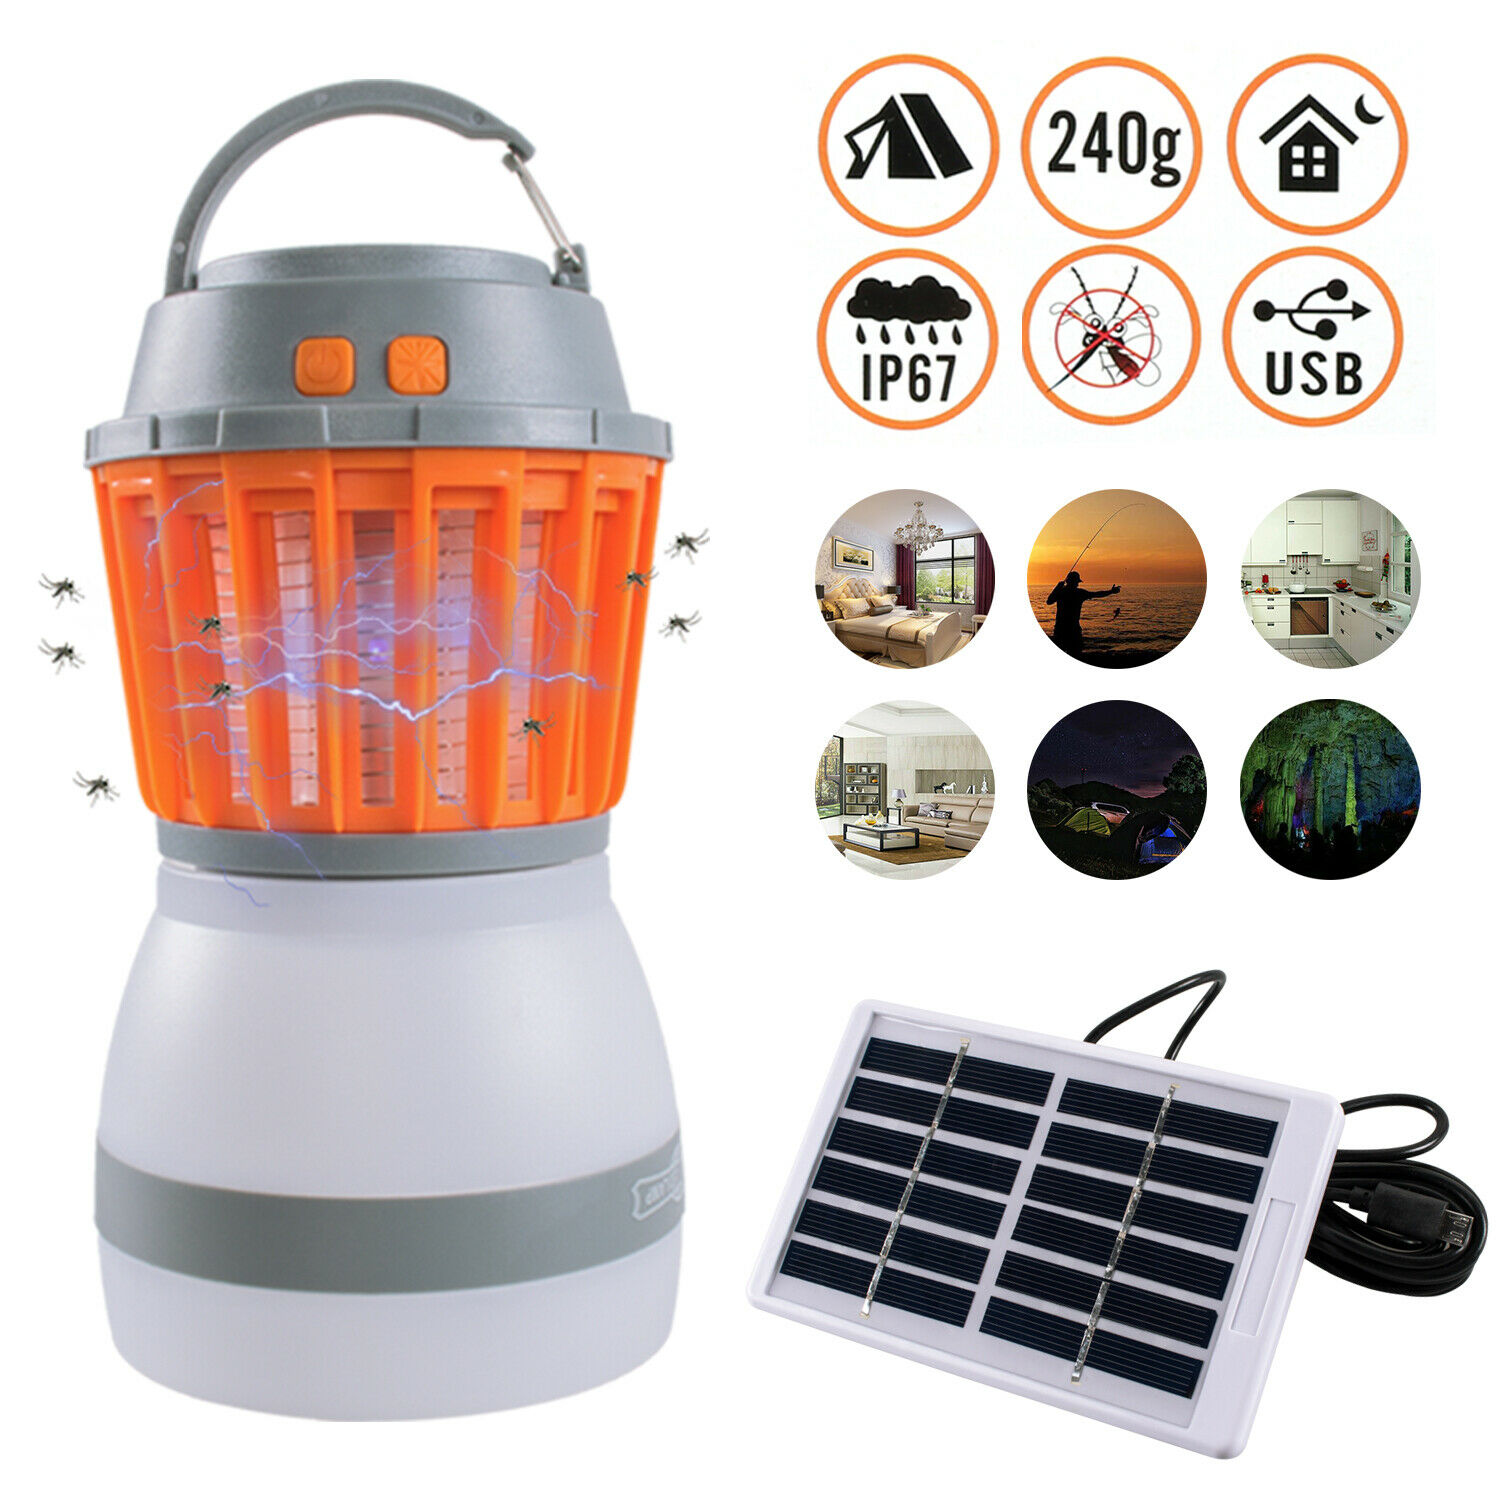 2 in 1 Solar Camping Lantern Lamp Portable Outdoor Rechargeable LED Tent Hiking